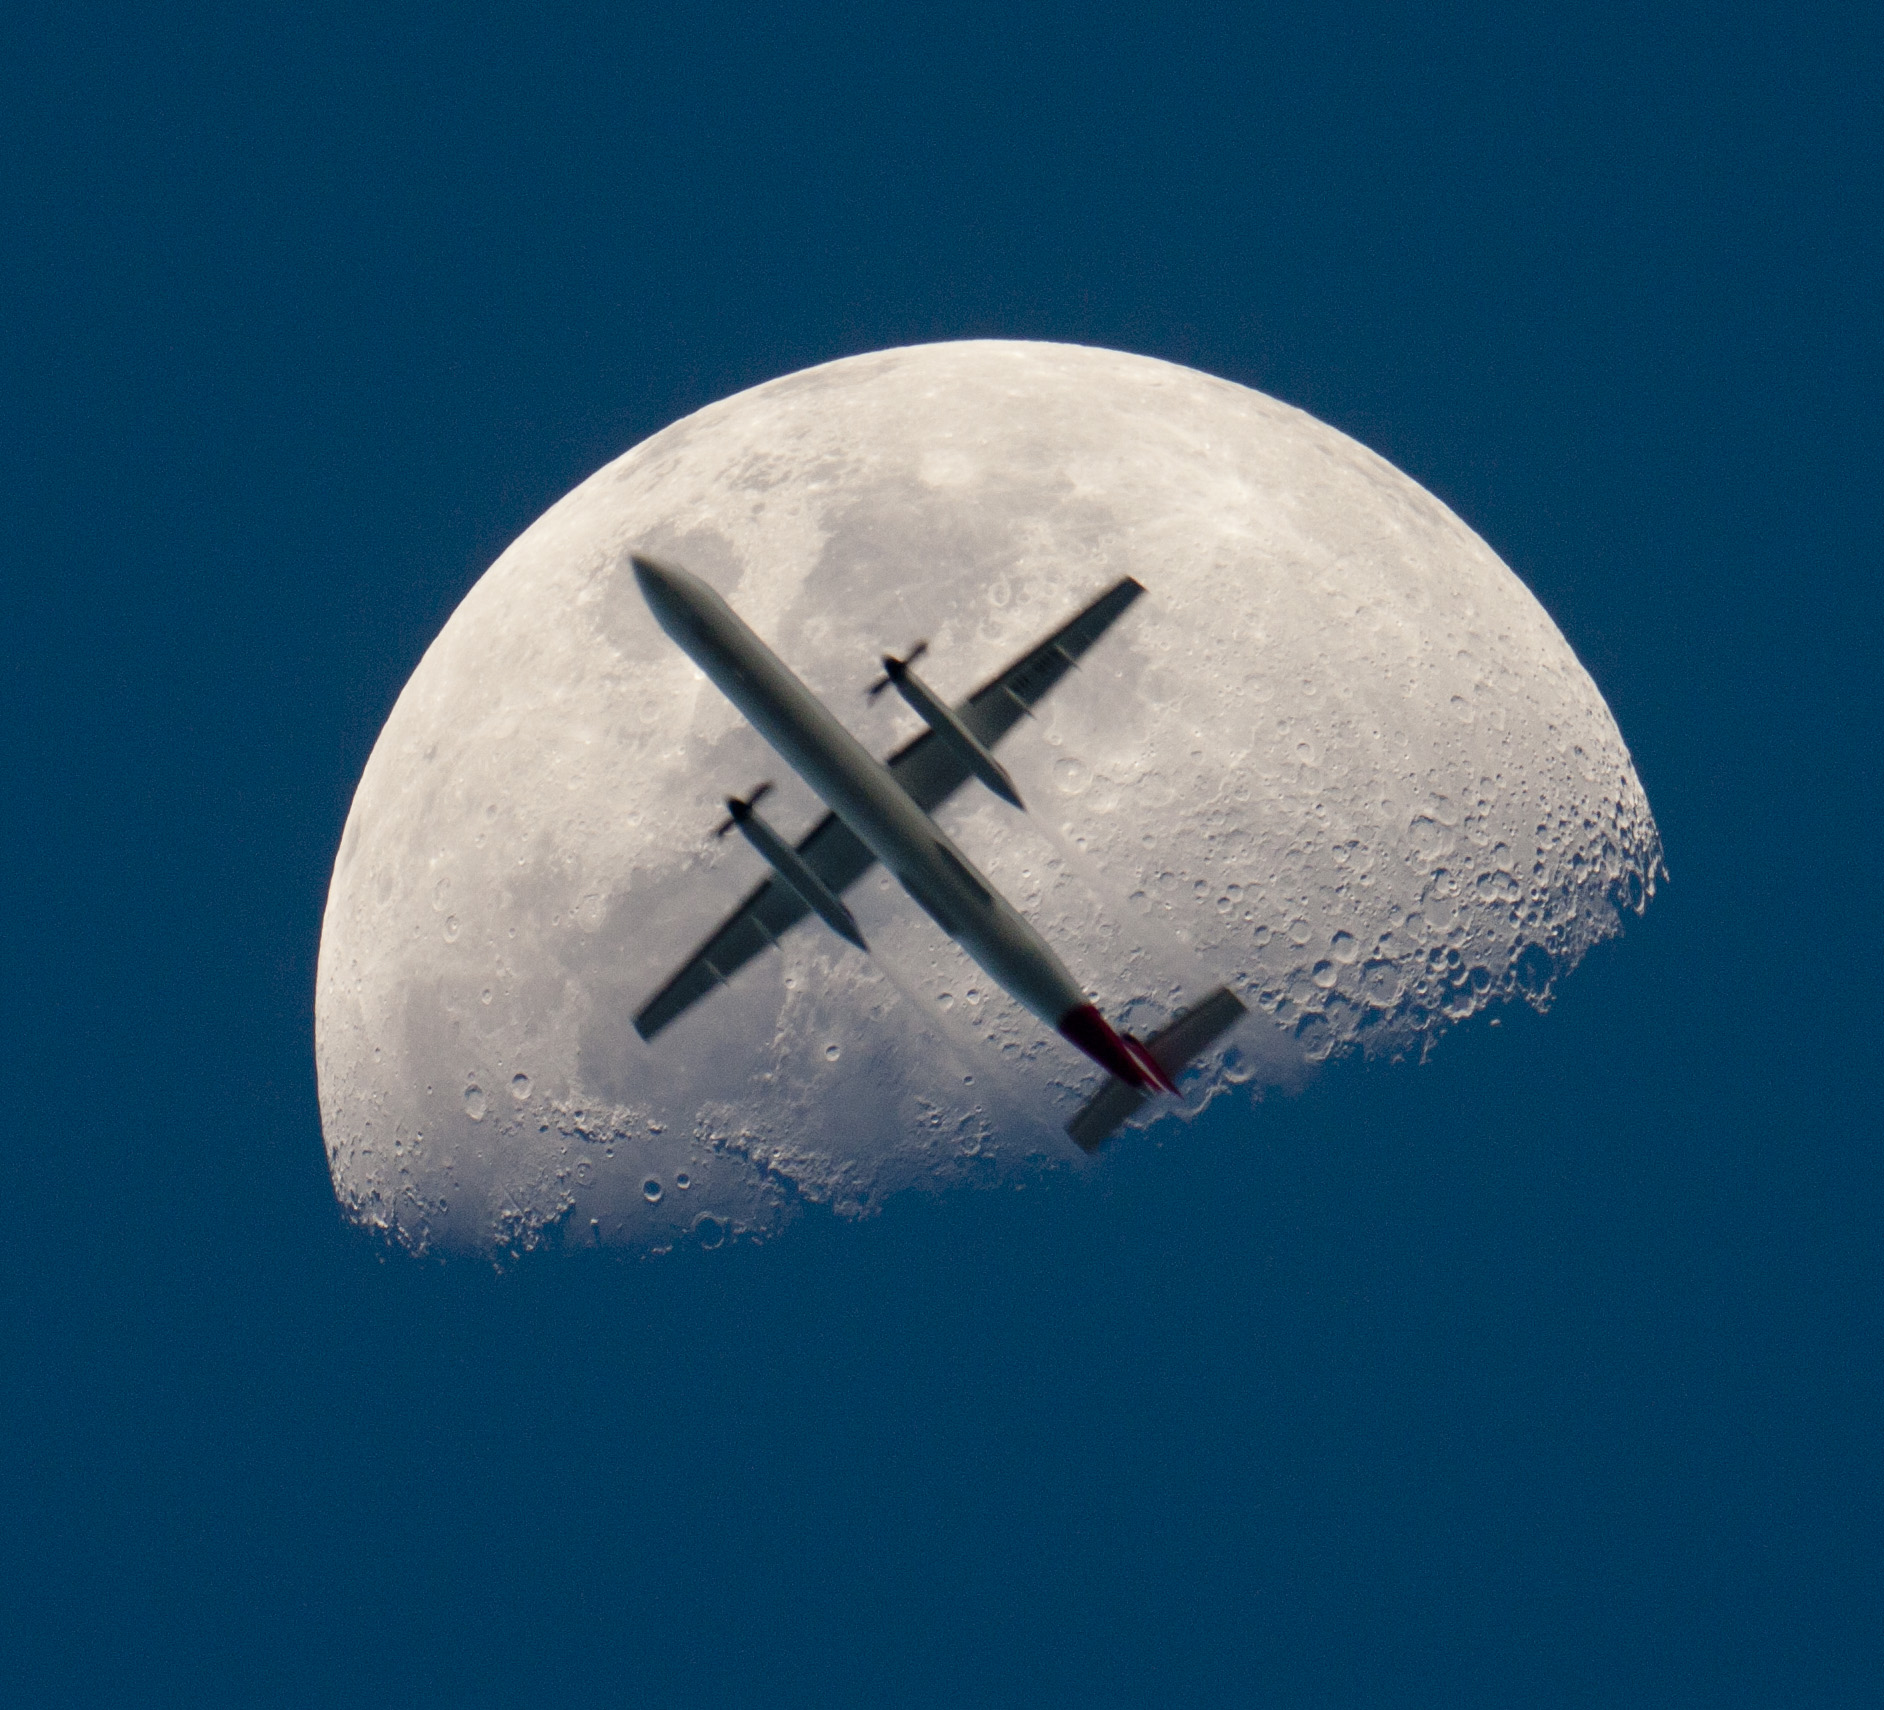 An Airplane in Front of the Moon. Credit & Copyright to Chris Thomas via APOD